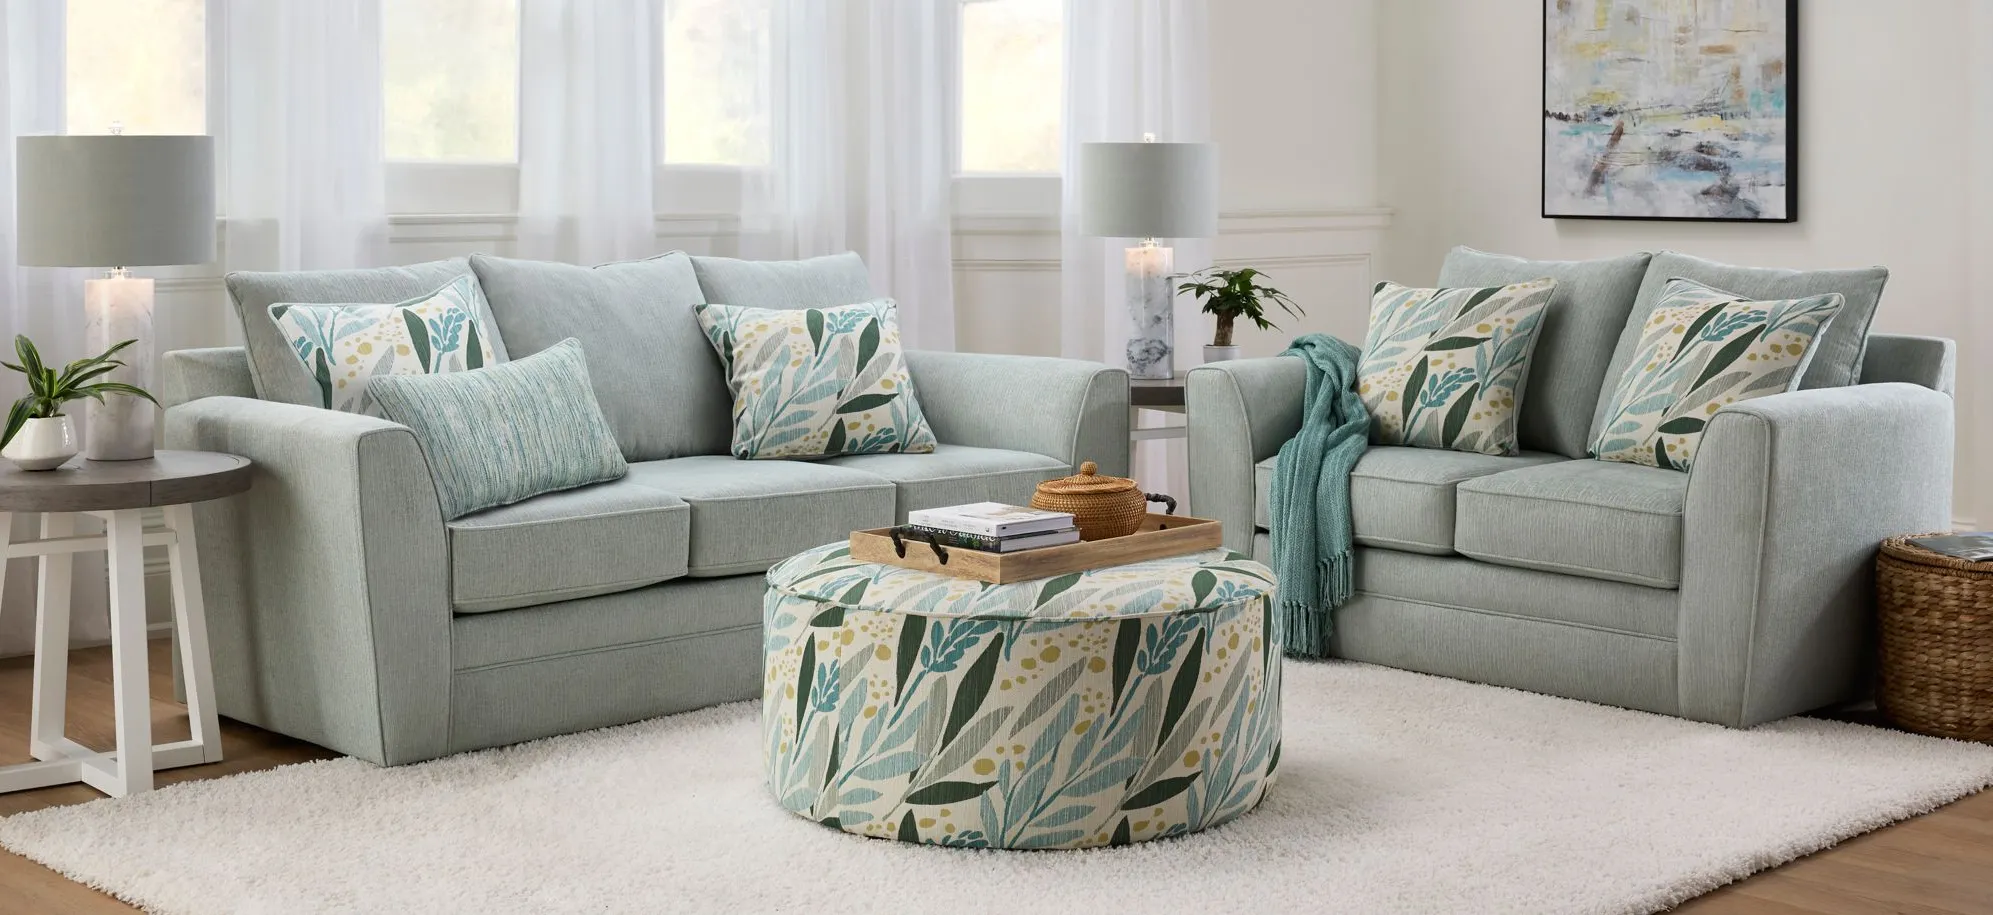 Meadow 2-pc. Sofa and Loveseat in First Times Seafoam;Forest Pansy Evergreen by Fusion Furniture